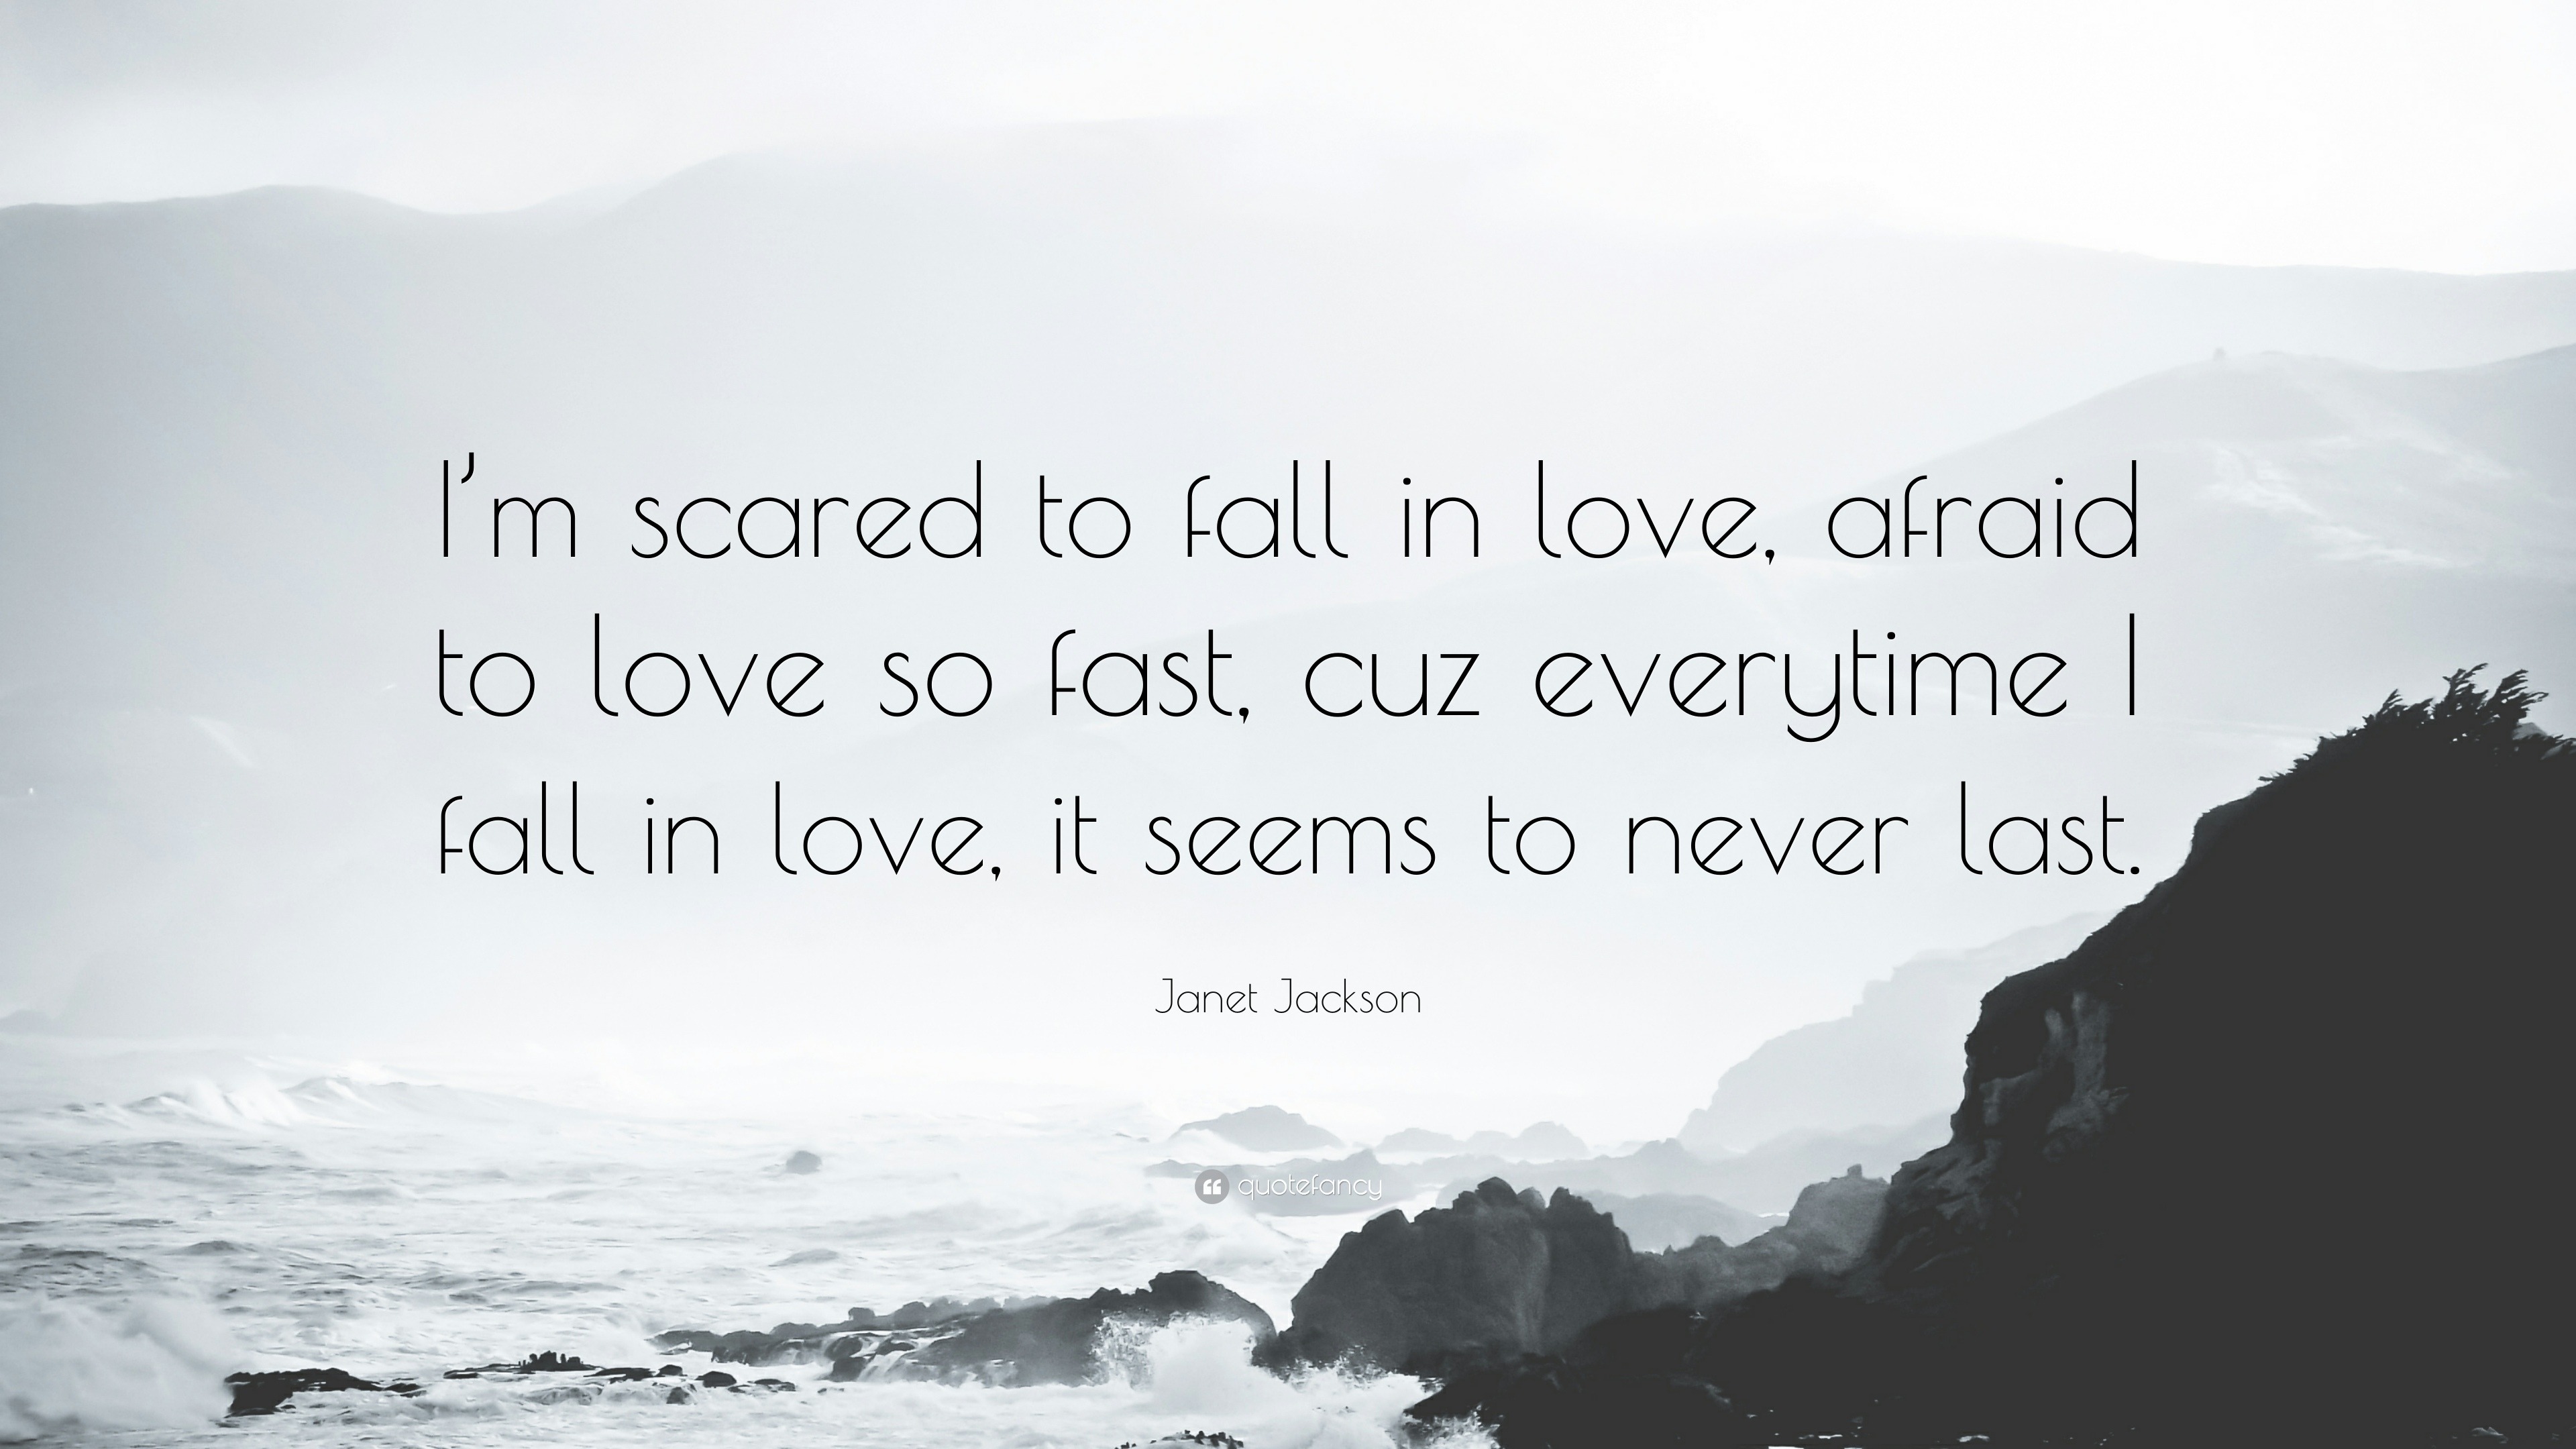 Janet Jackson Quote: “I'm scared to fall in love, afraid to love so fast,  cuz